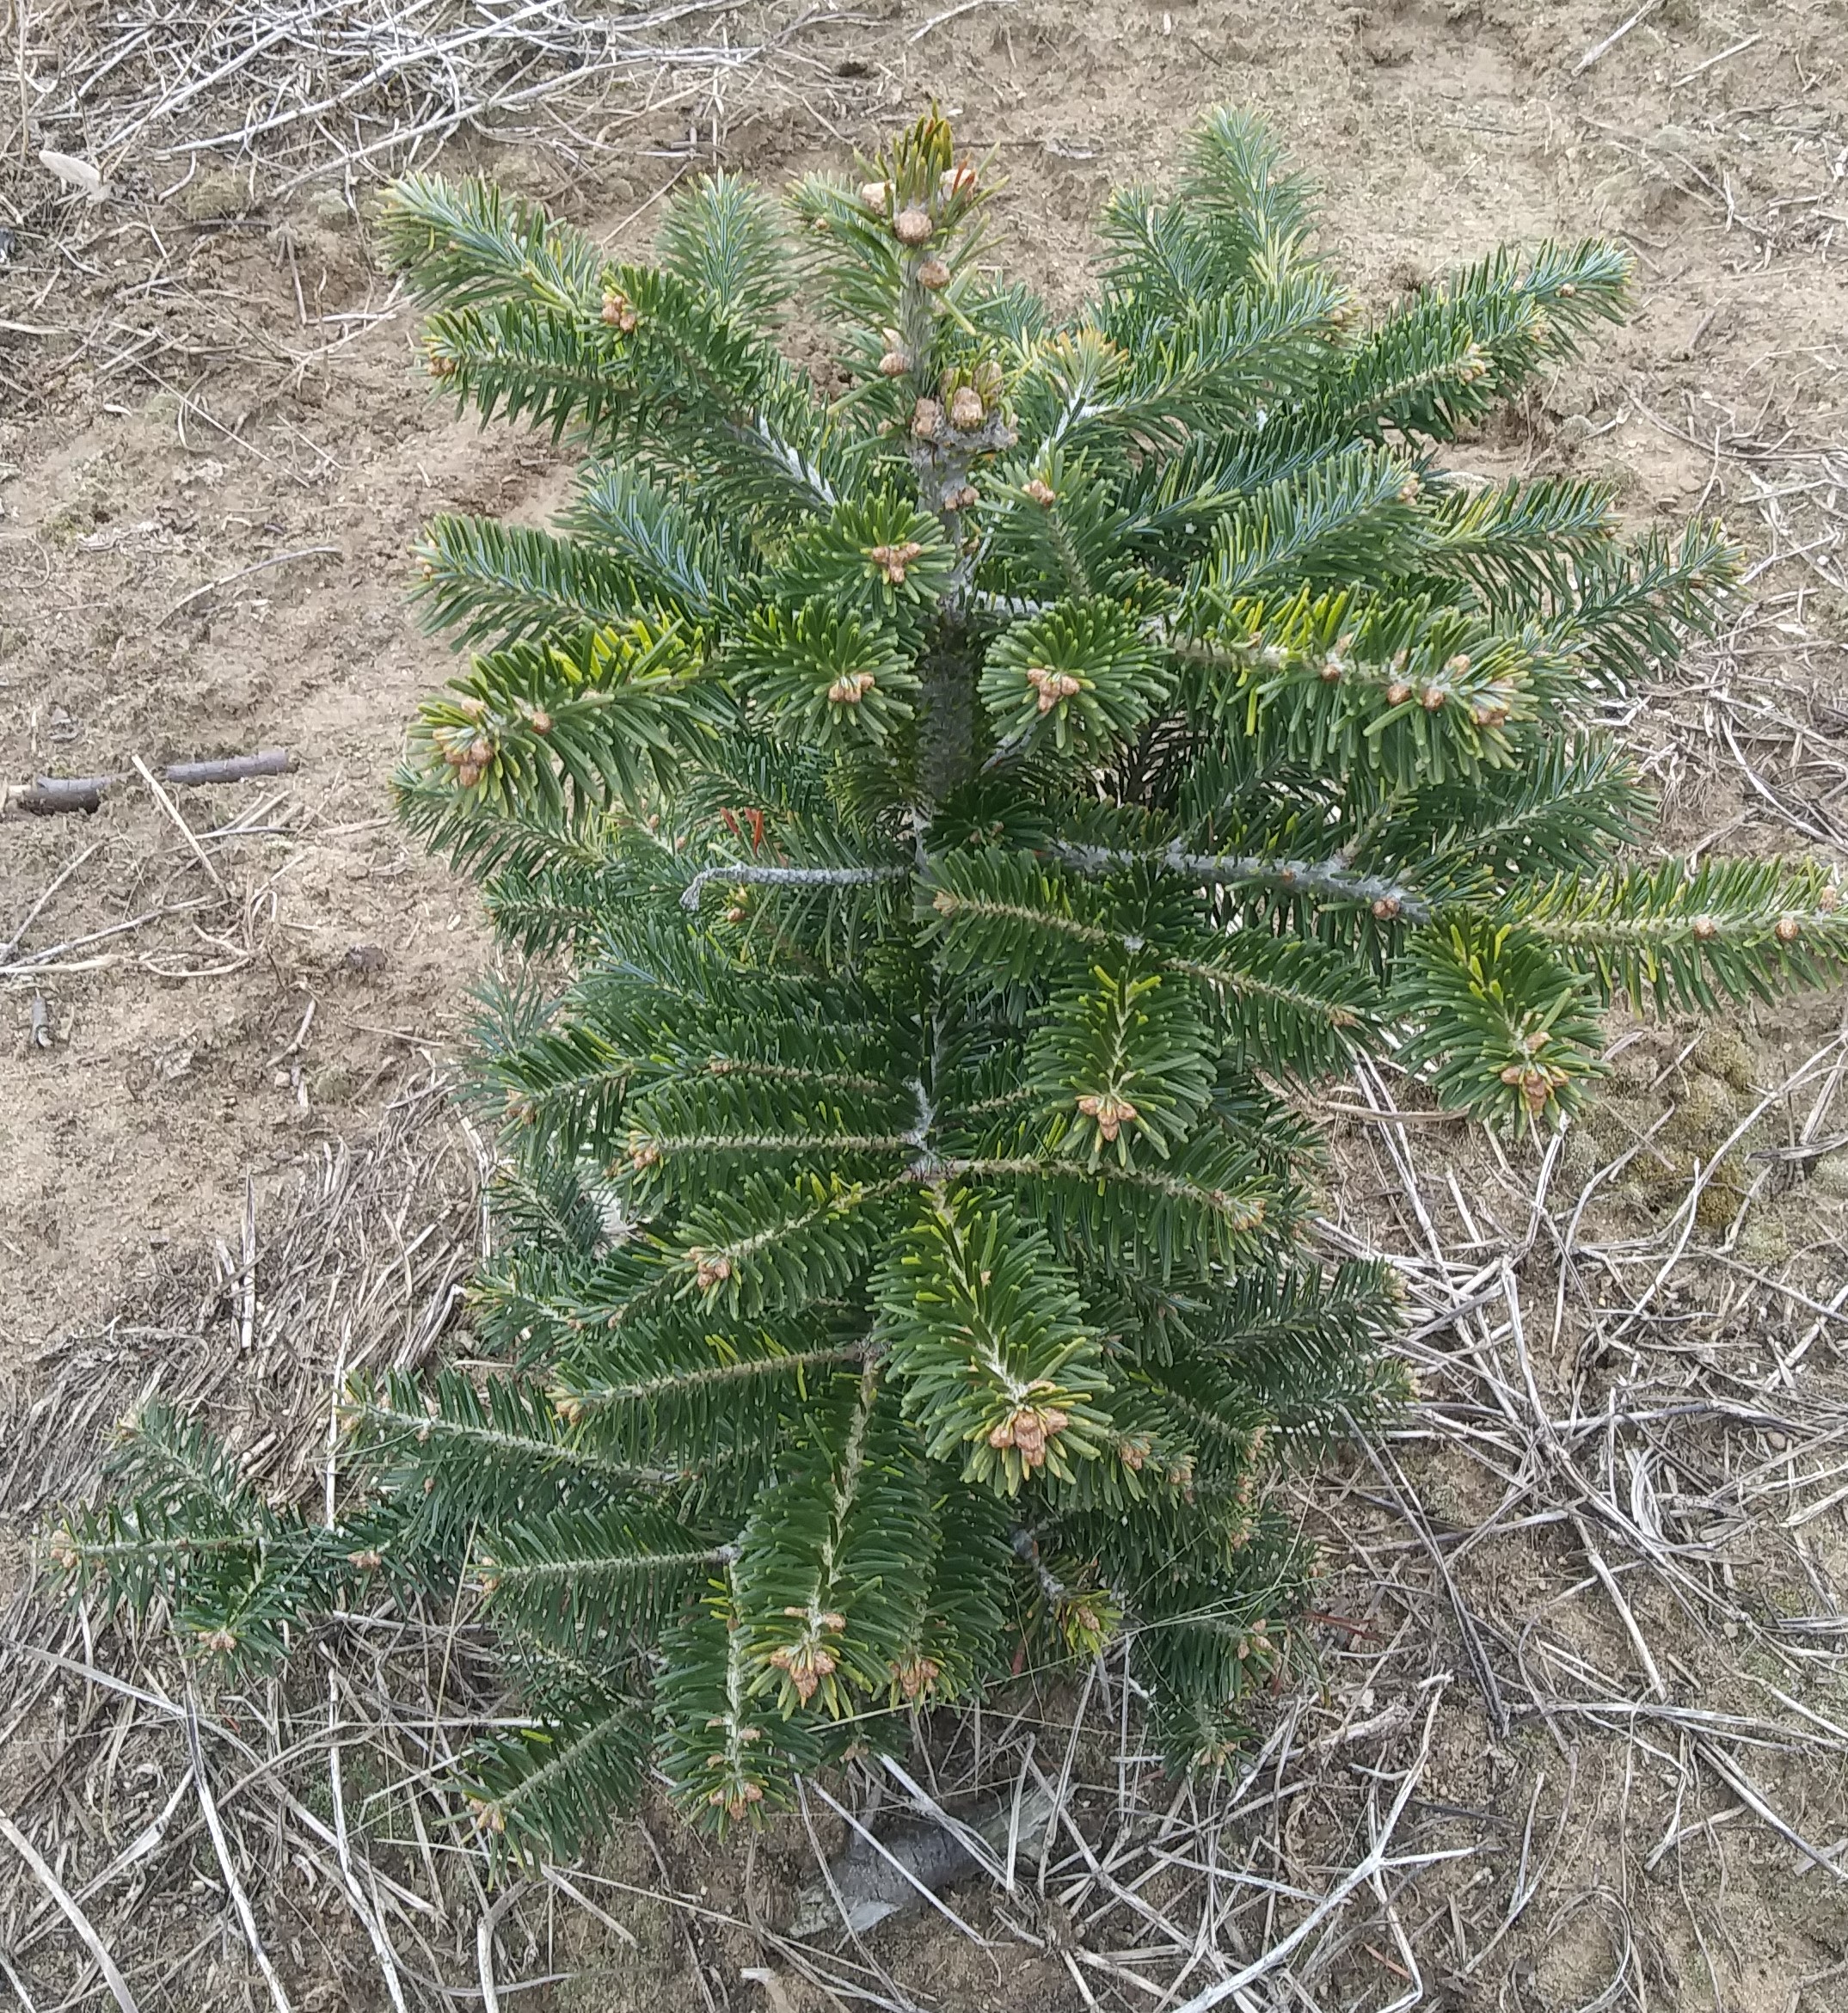 Stunted and twisted growth on a Christmas tree.